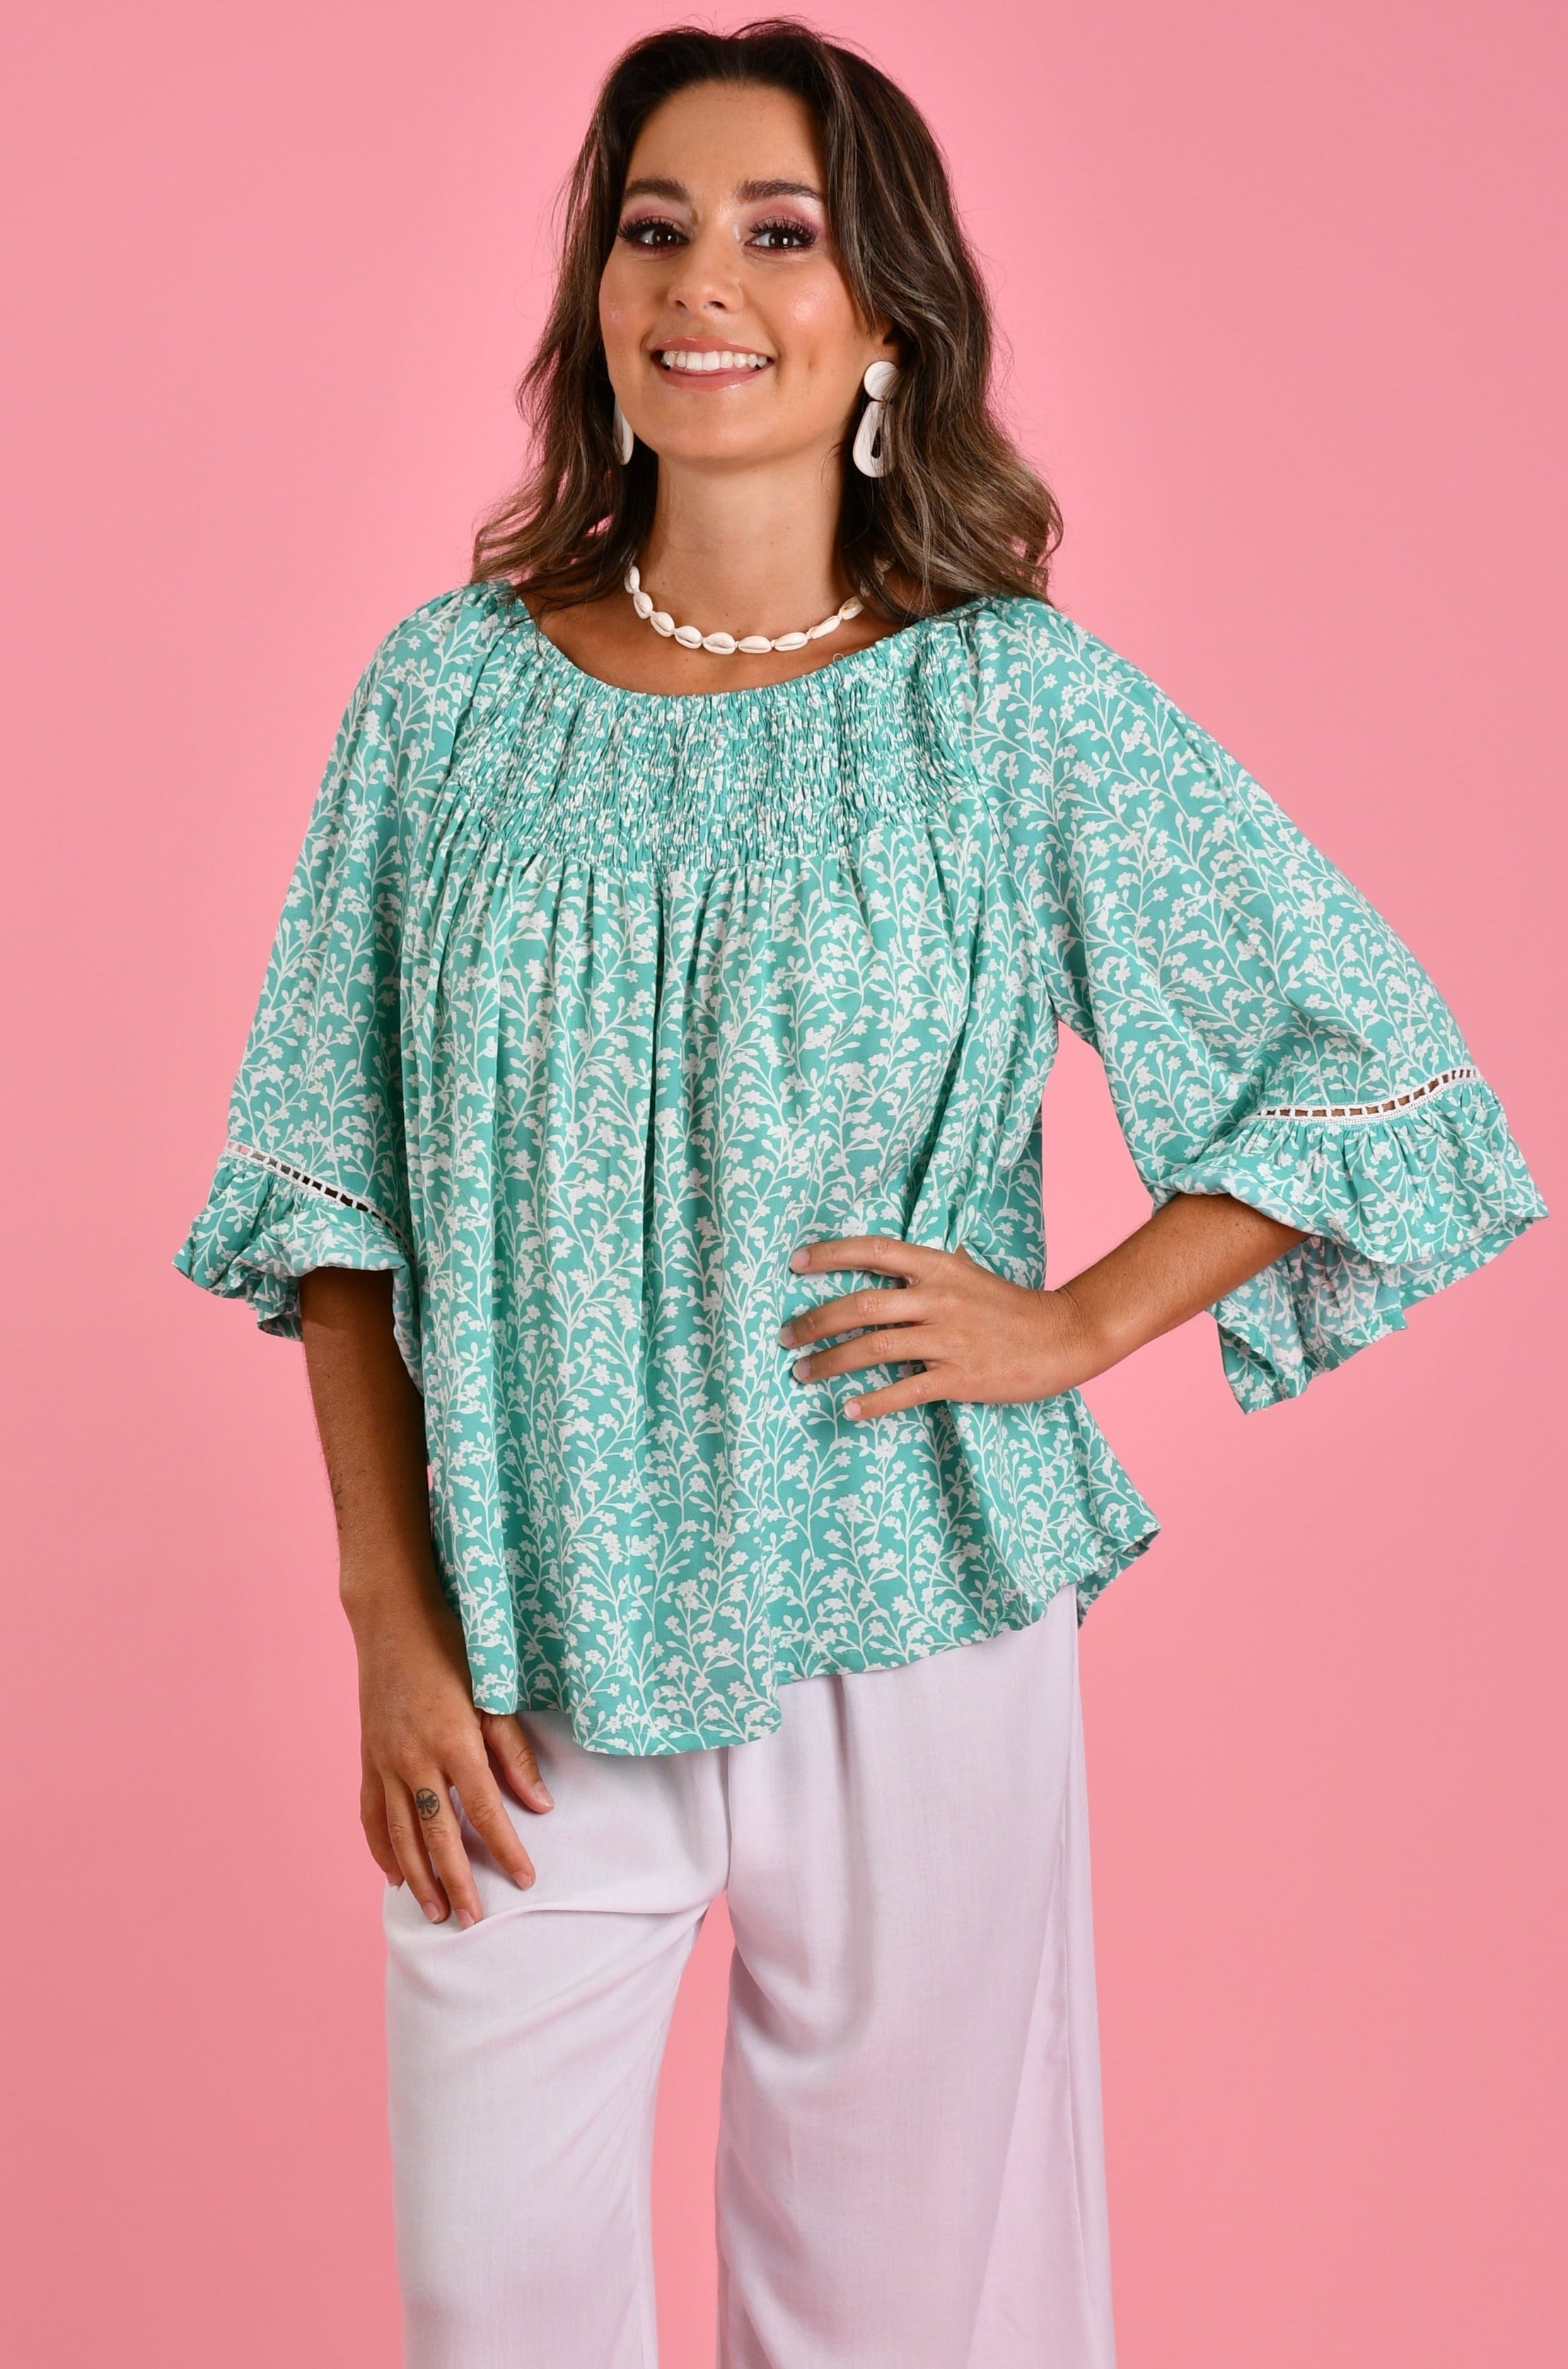 VBLT113 - ROUCHED BELL SLEEVE TOP - BLOSSOM MINT